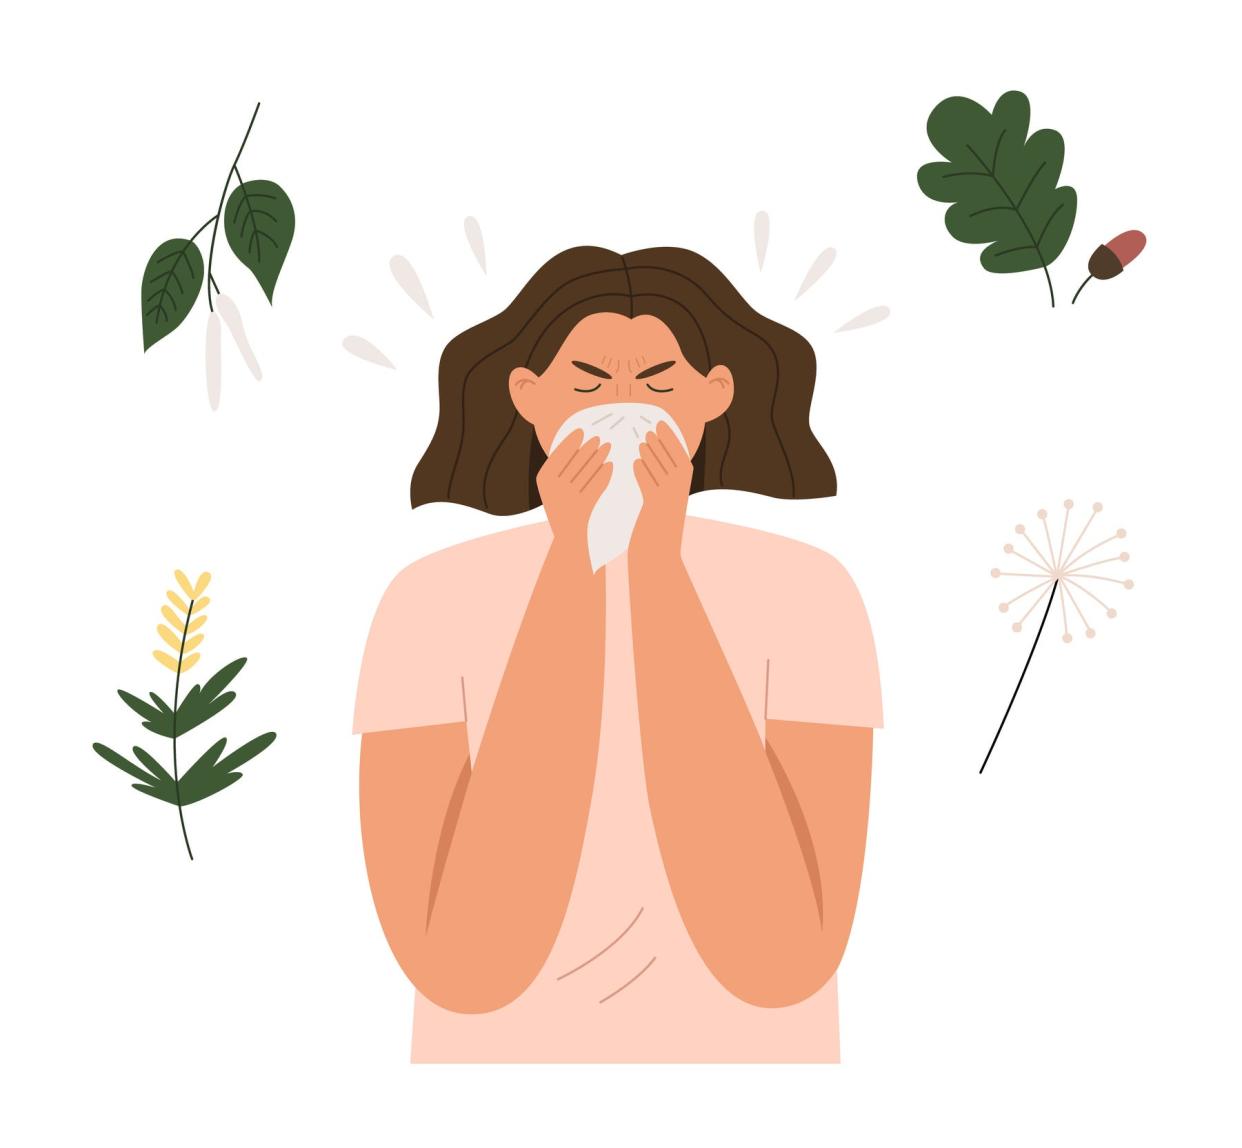 Seasonal allergies can cause uncomfortable symptoms such as sneezing, coughing and itchy eyes.